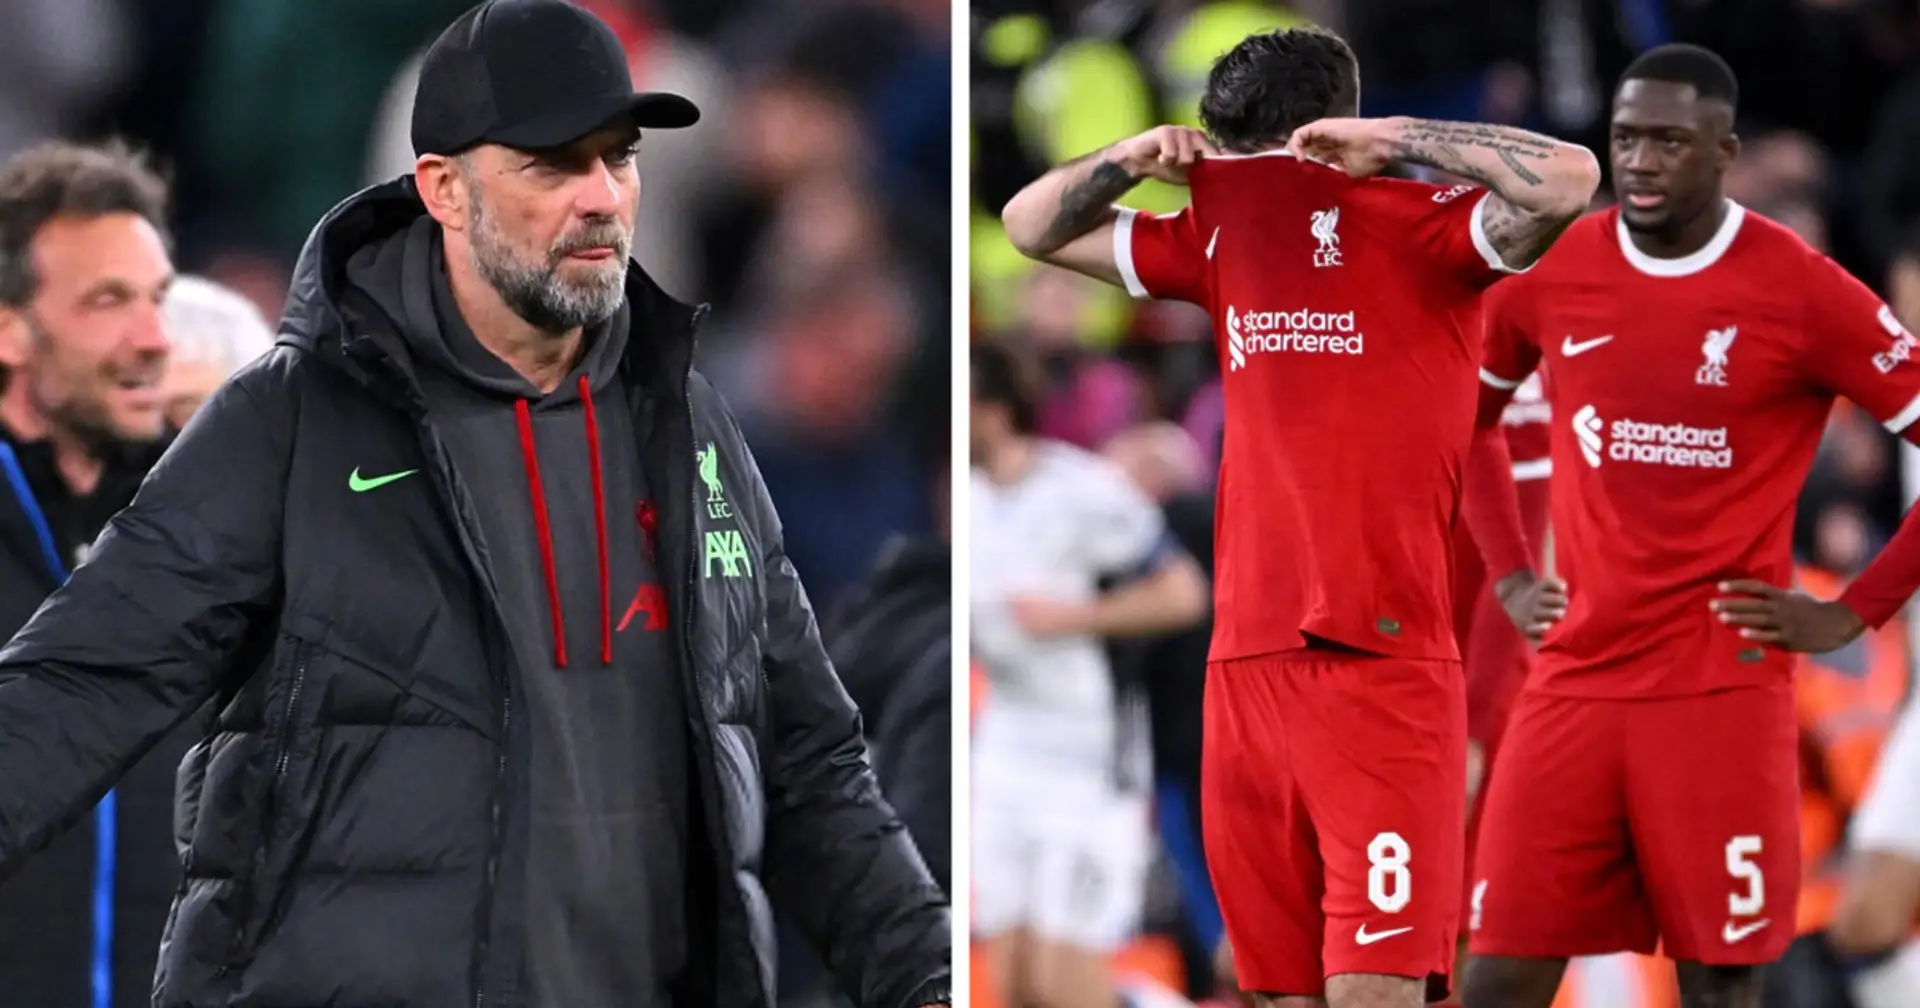 Worst game of the season at Anfield - Liverpool fan highlighted 8 key points that led to this defeat